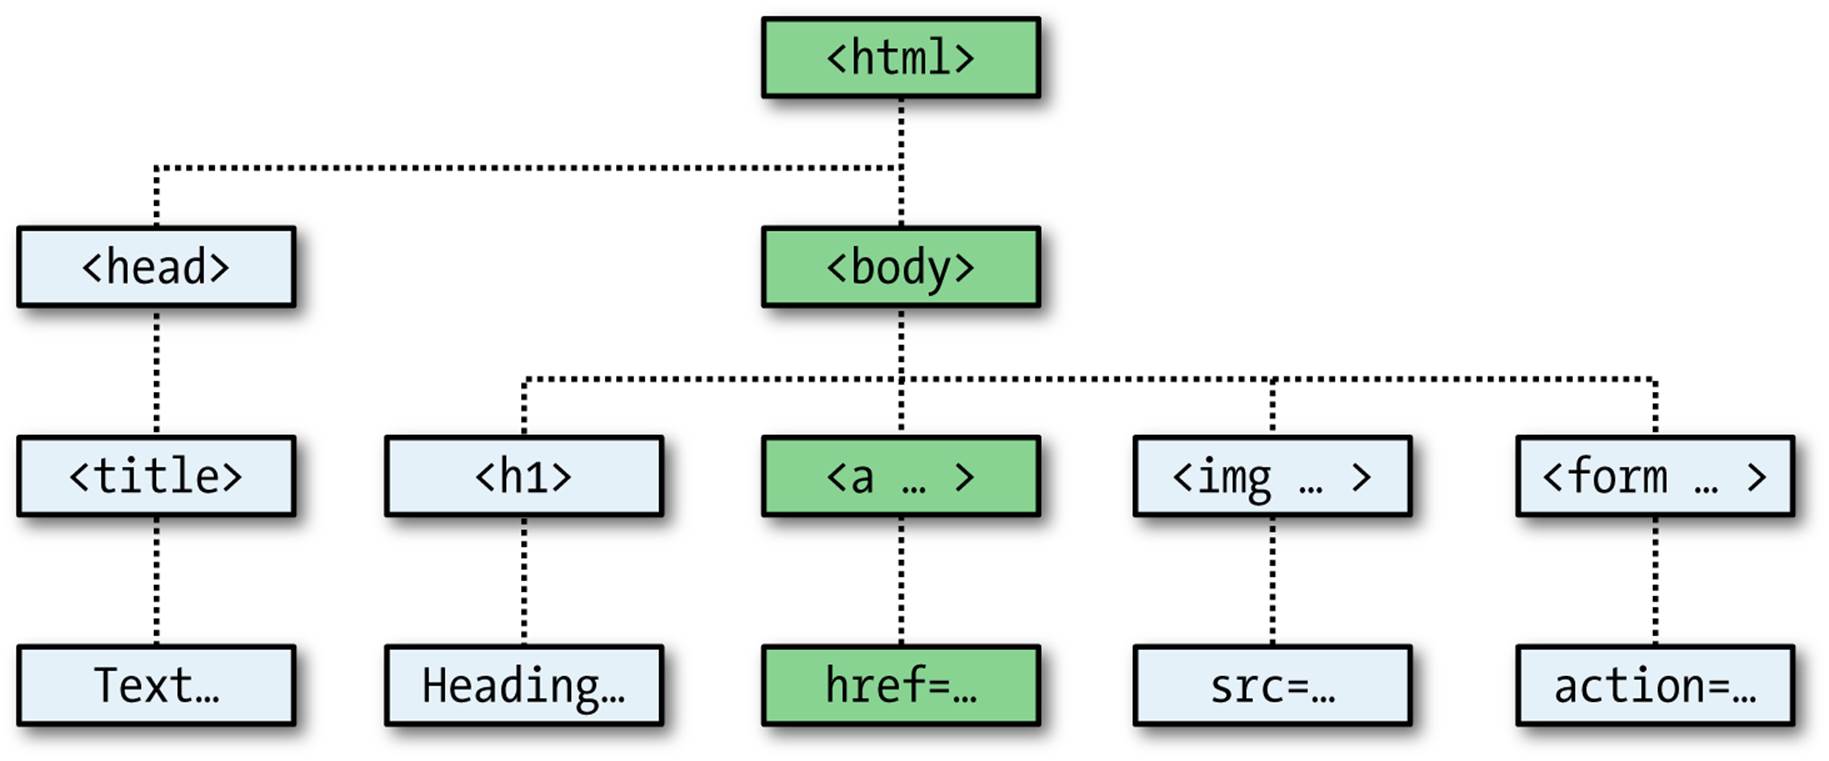 Example of DOM object hierarchy